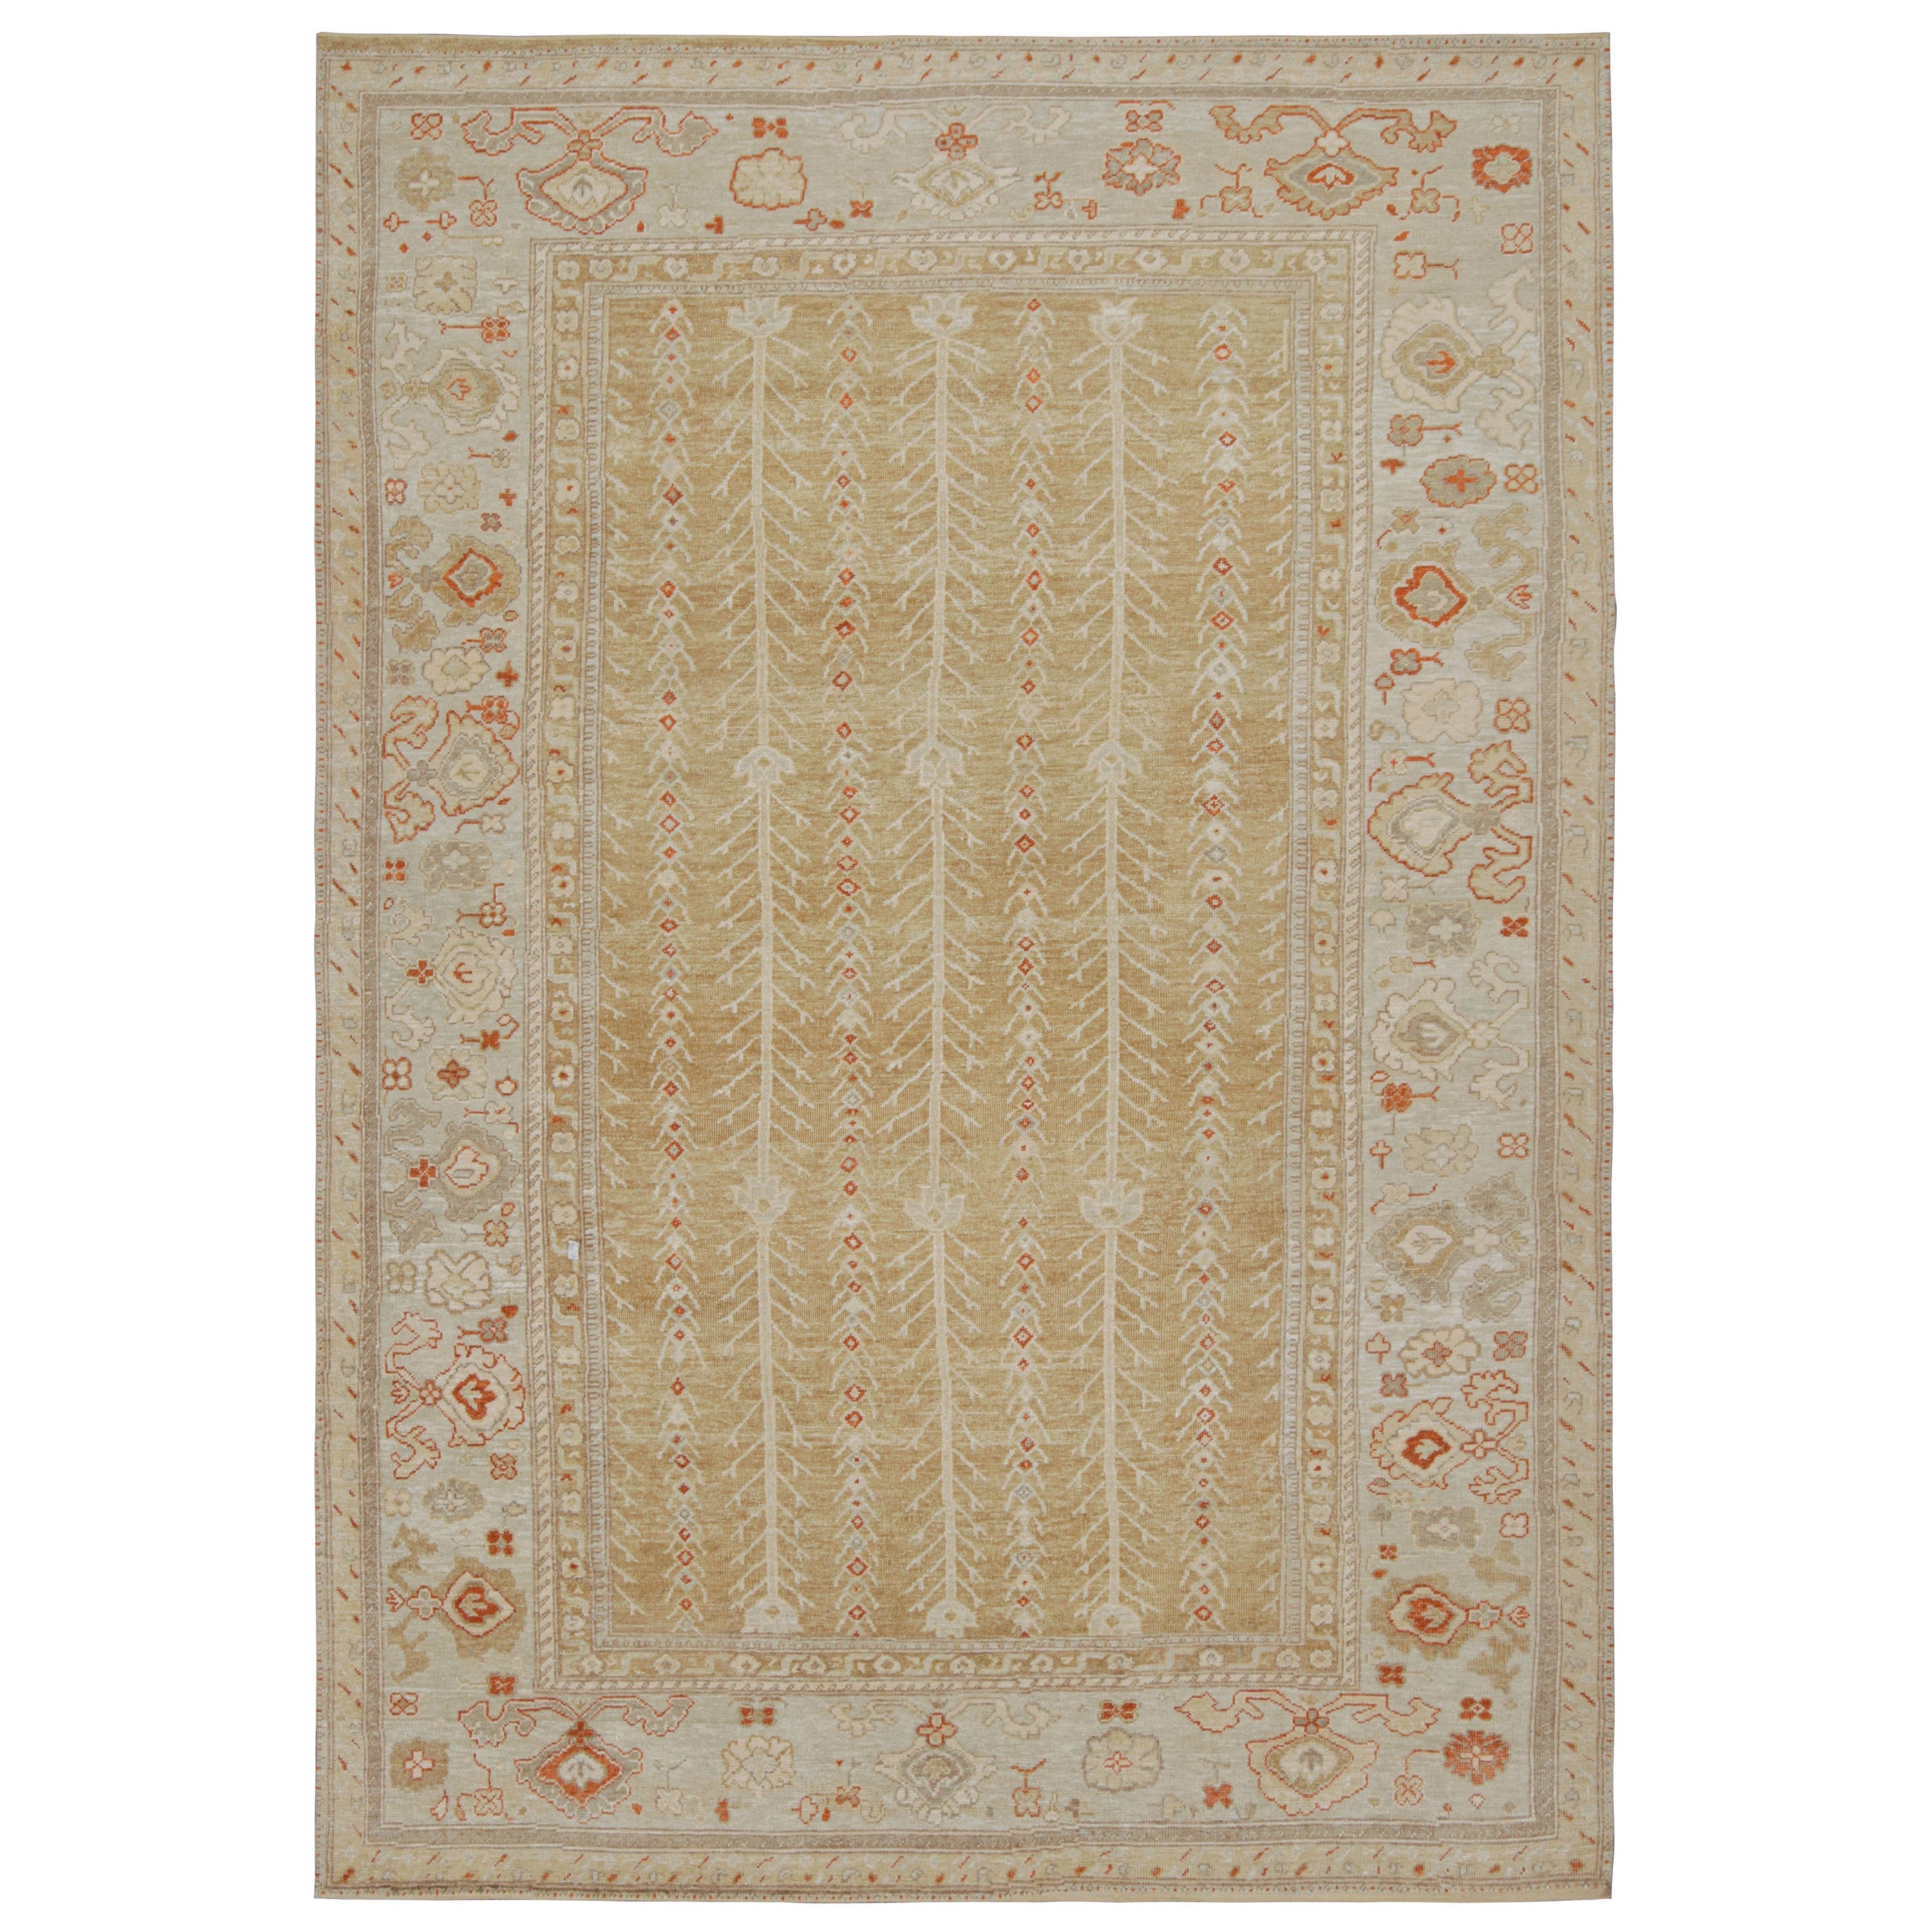 Rug & Kilim’s Oushak Style Rug in Gold and Gray with Floral Patterns